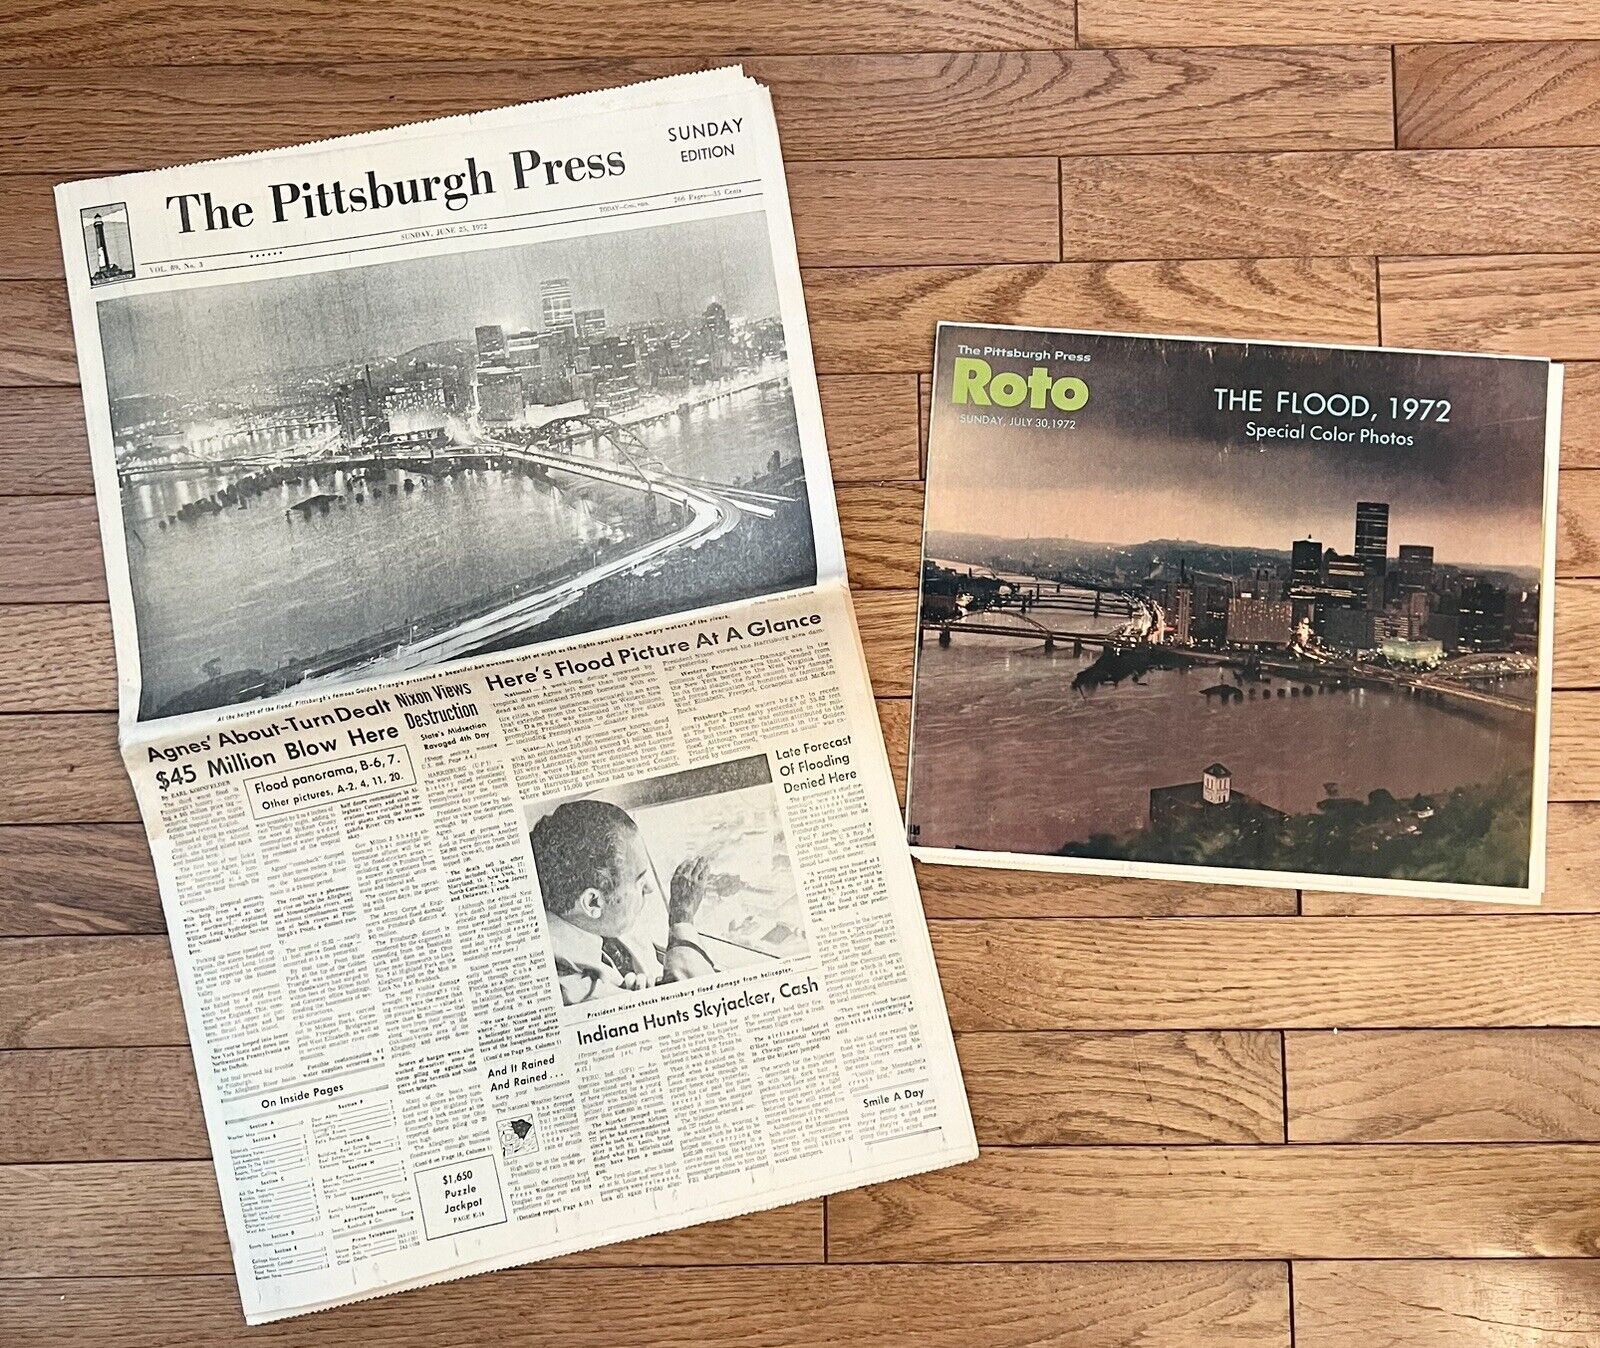 The Flood of 1972 - Pittsburgh Press Newspaper Plus Special Photo Insert